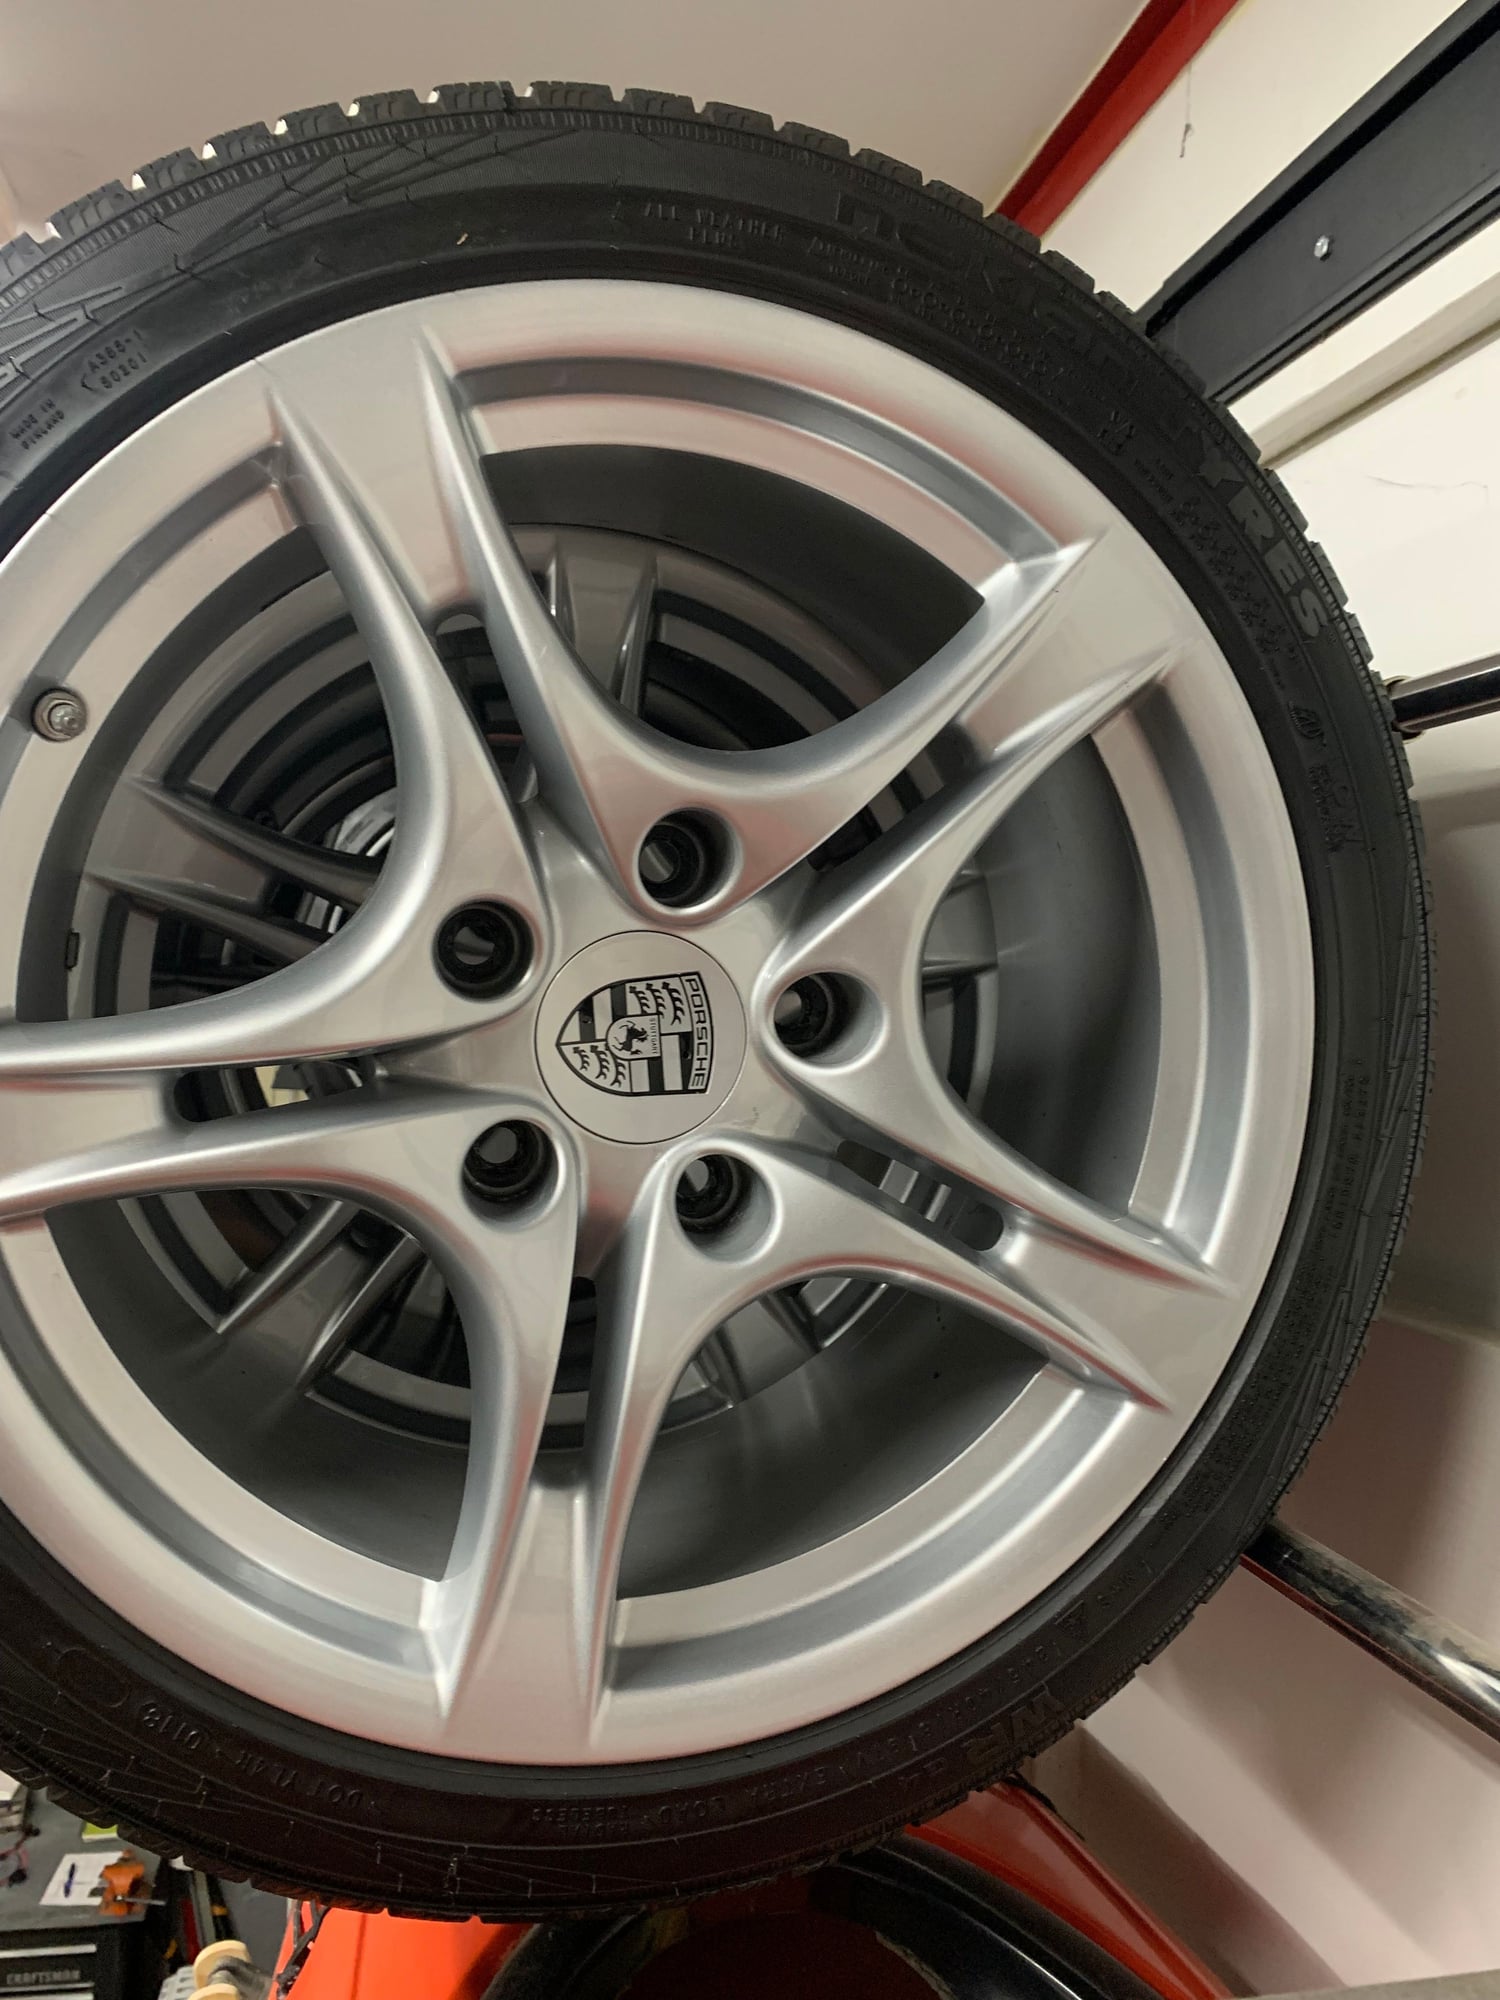 Wheels and Tires/Axles - Winter wheels & tires for 987.2 Cayman/Boxter - Used - 2009 to 2012 Porsche Cayman - Danbury, CT 06810, United States